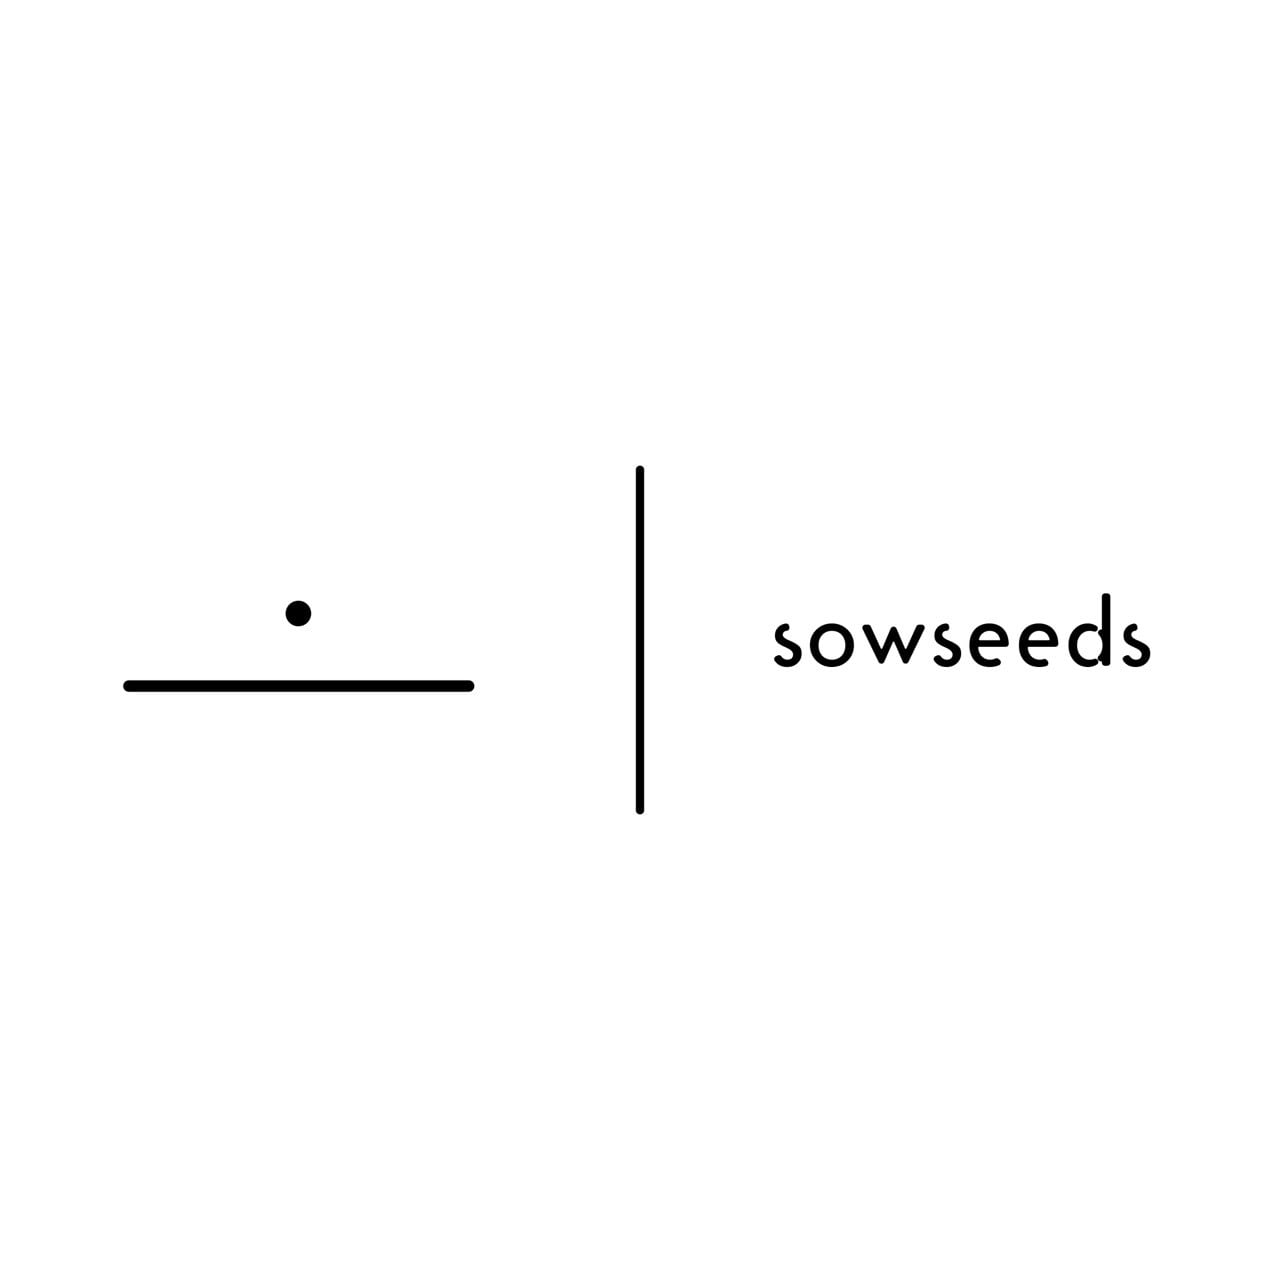 sowseeds